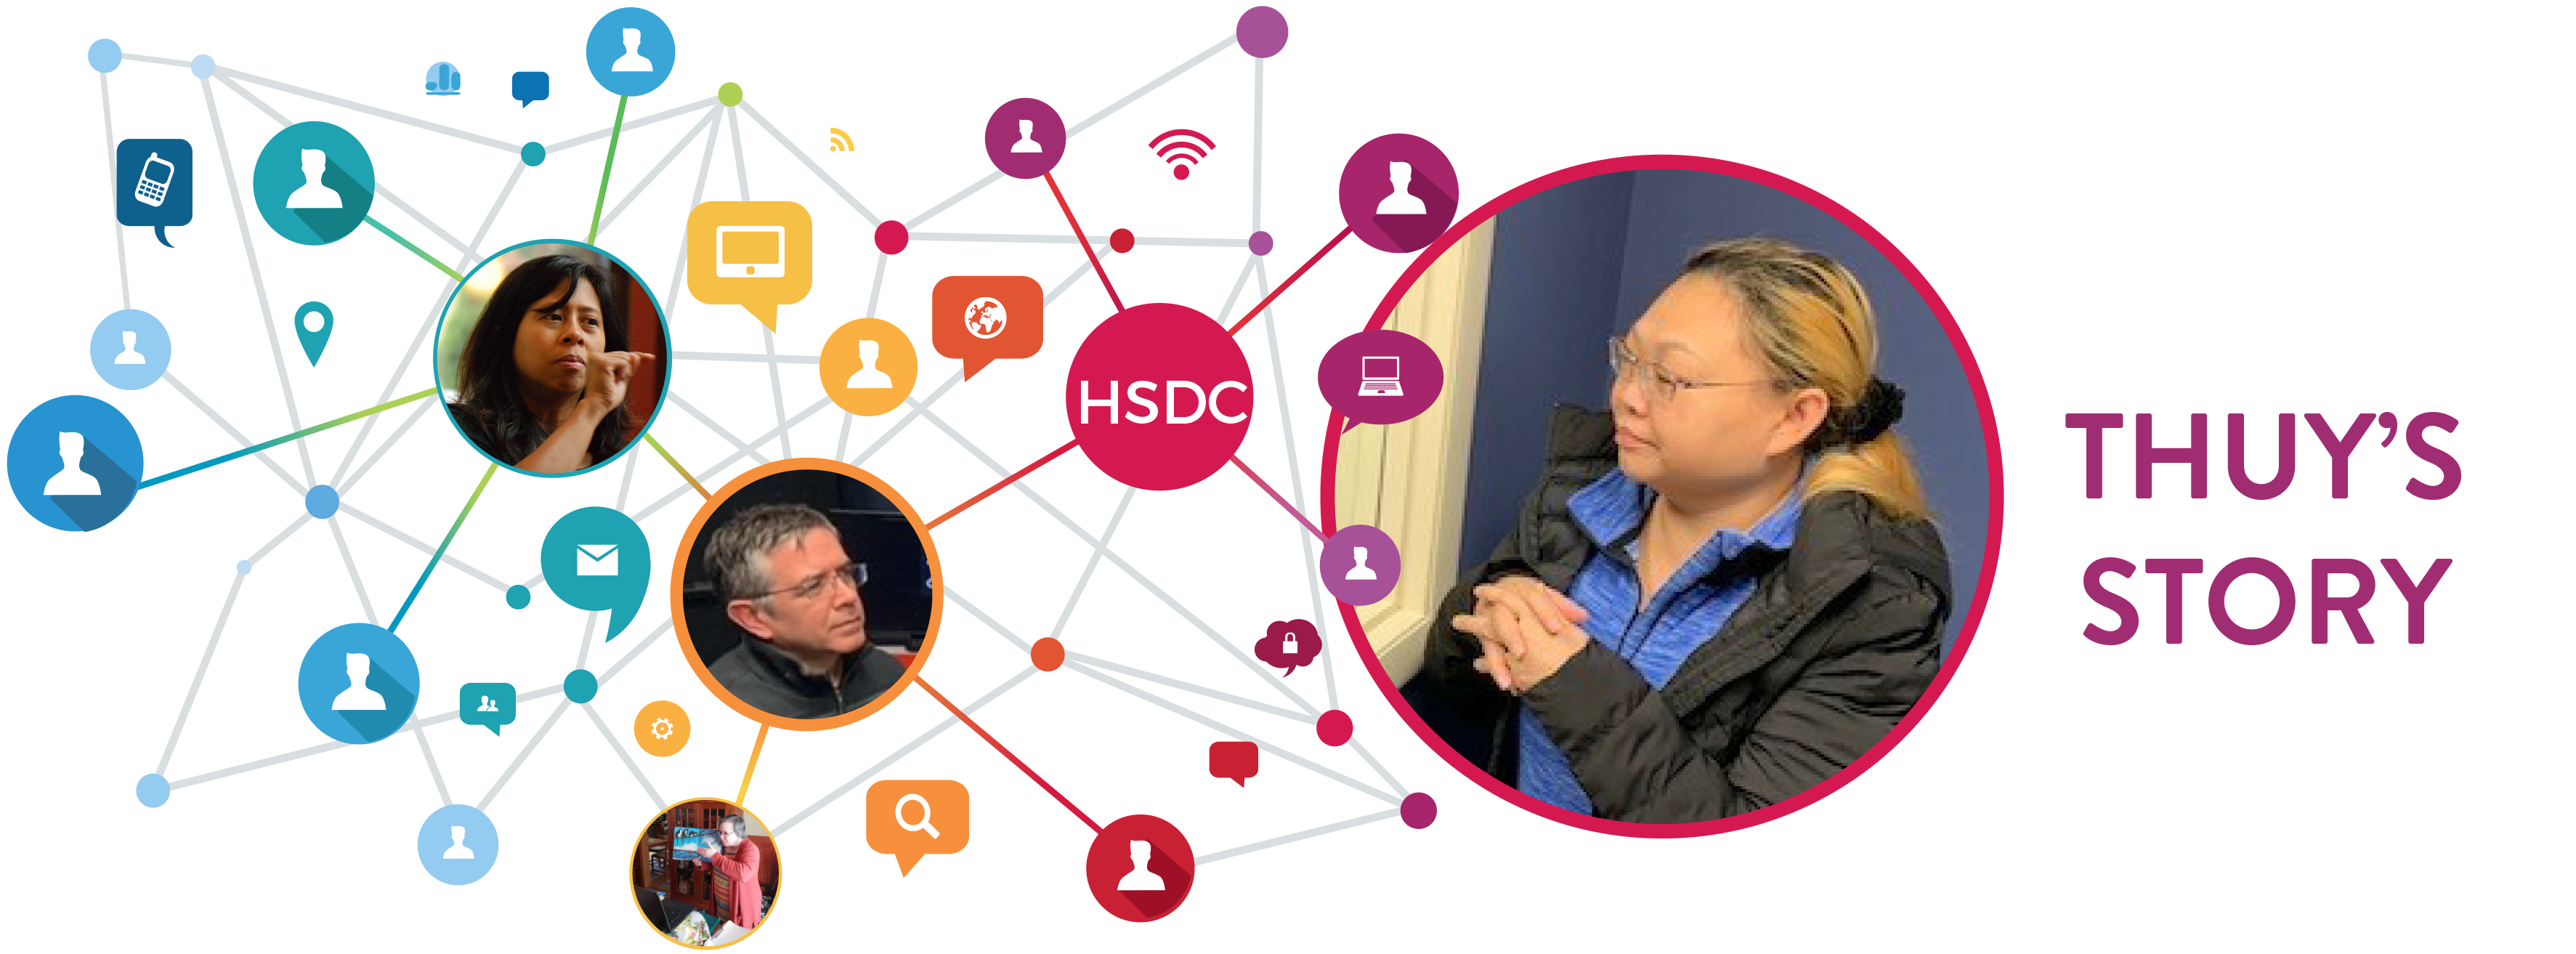 A banner with a title on the right and an image on the left. The title says "Thuy's Story". The image shows many colored circles and icons connected by colored lines. Notable circles include a staff member looking to the right, the HSDC logo, and a staff member signing. To the left of the title is a large circle with Thuy, a woman with blonde hair.